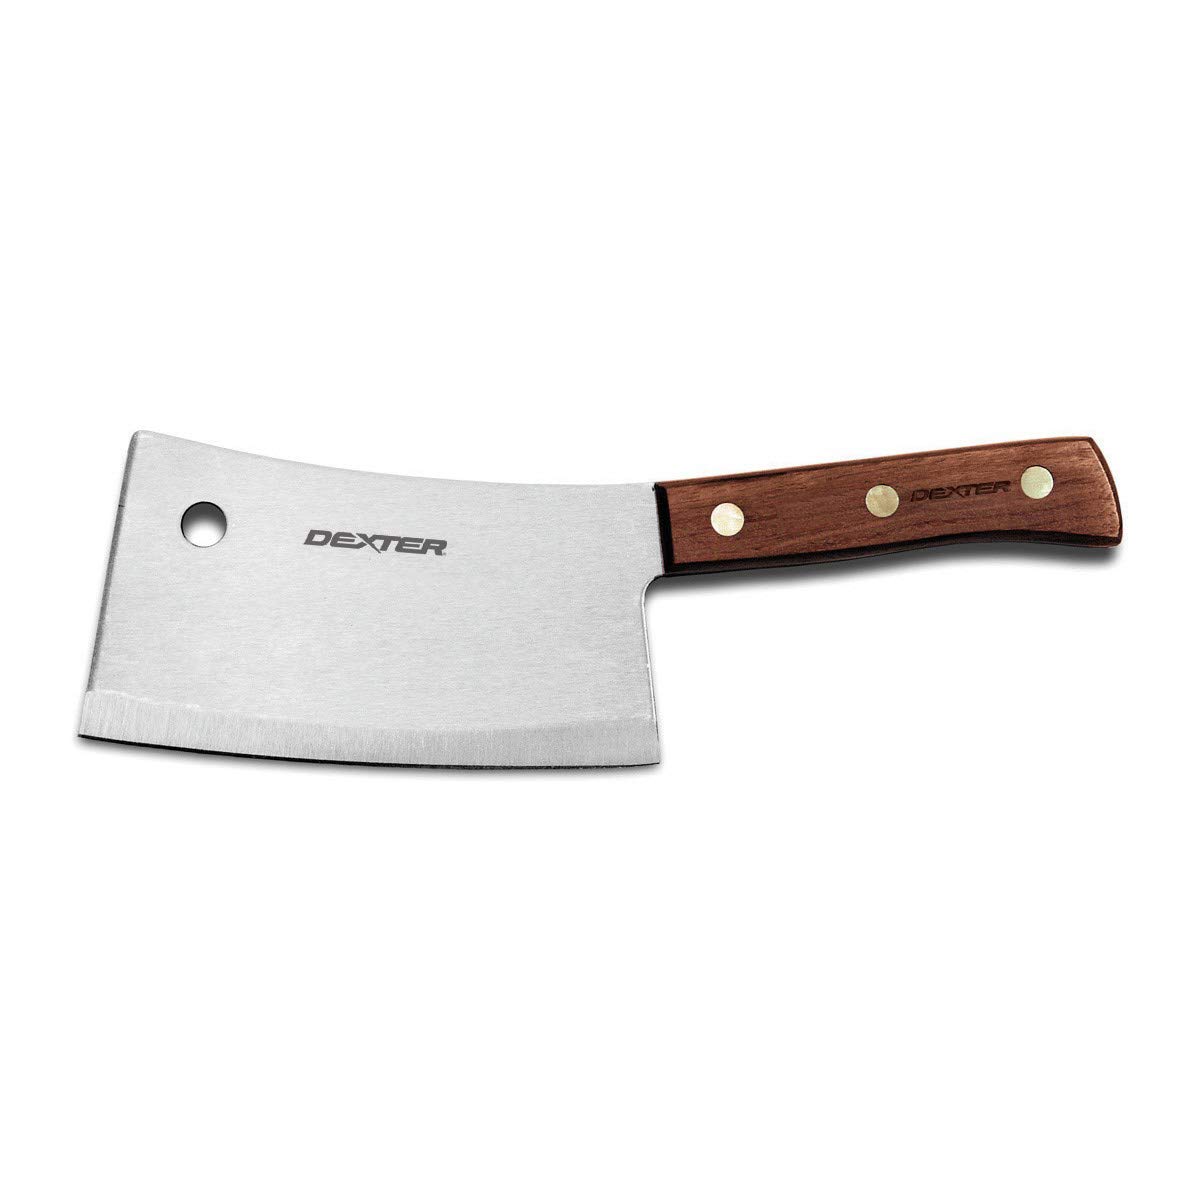 Dexter-Russell Traditional (08240) 9, stainless blade, rosewood handle, Made stainless steel heavy duty cleaver, Wood